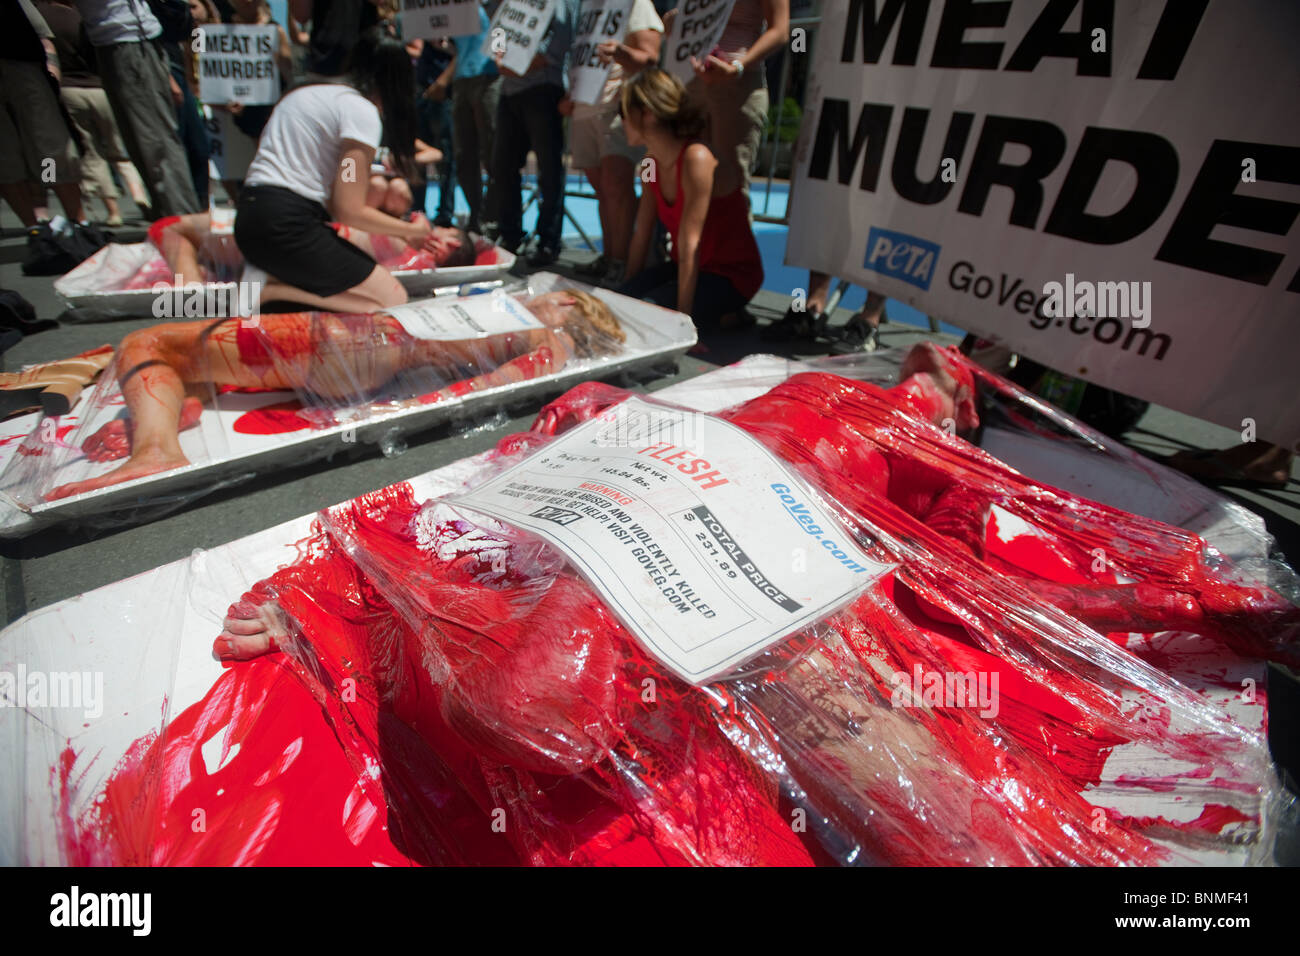 Activists from the animal rights group PETA protest the slaughter of